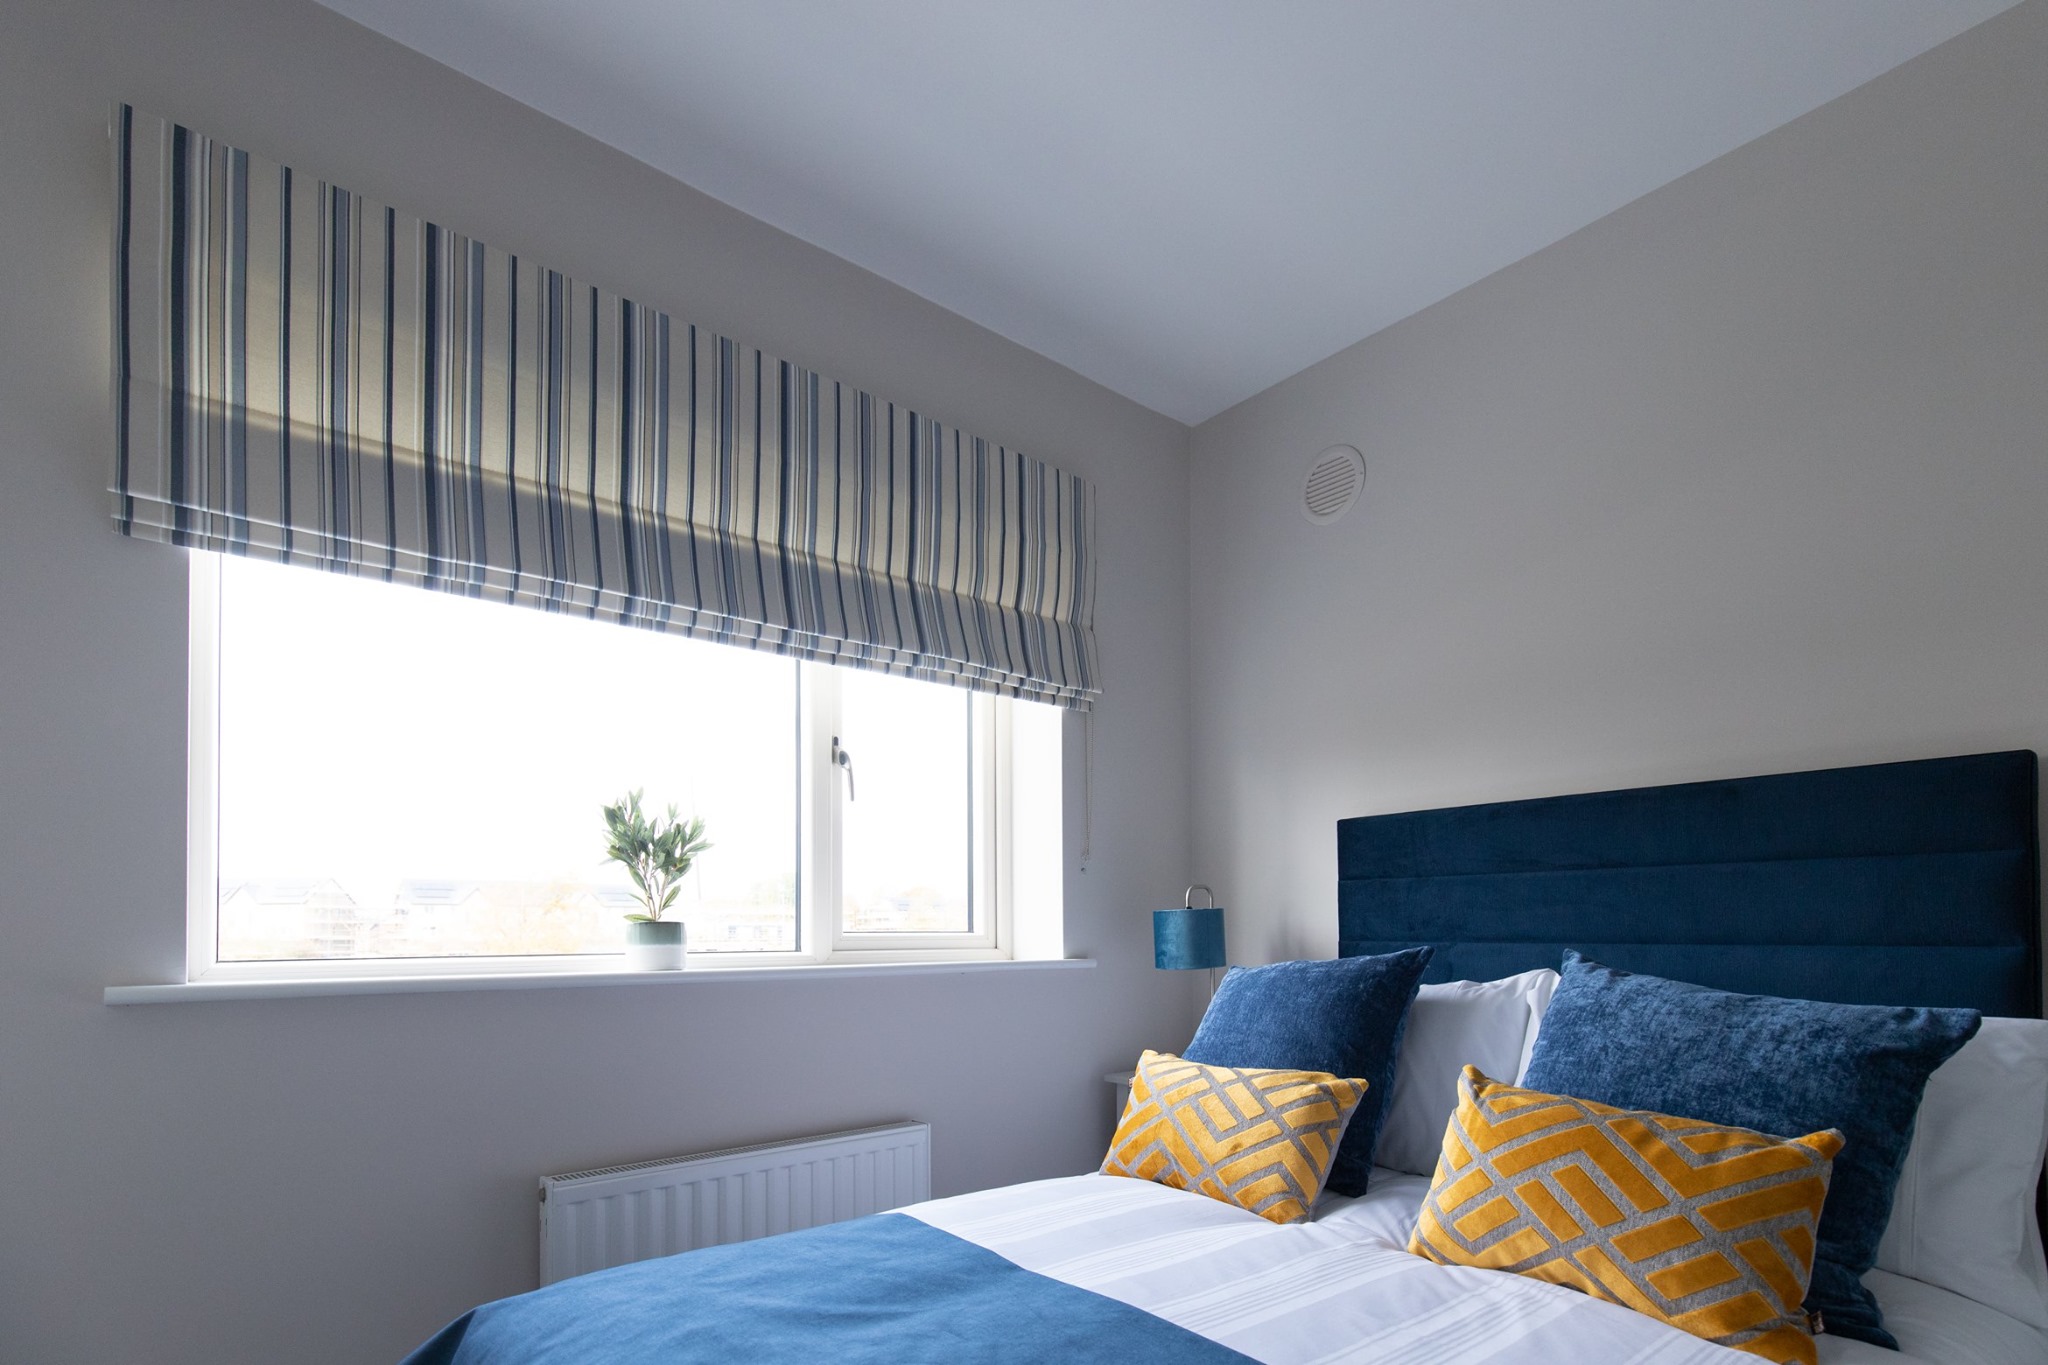 This bedroom features a roman blind in our ever-popular Audrey Stripe fabric.